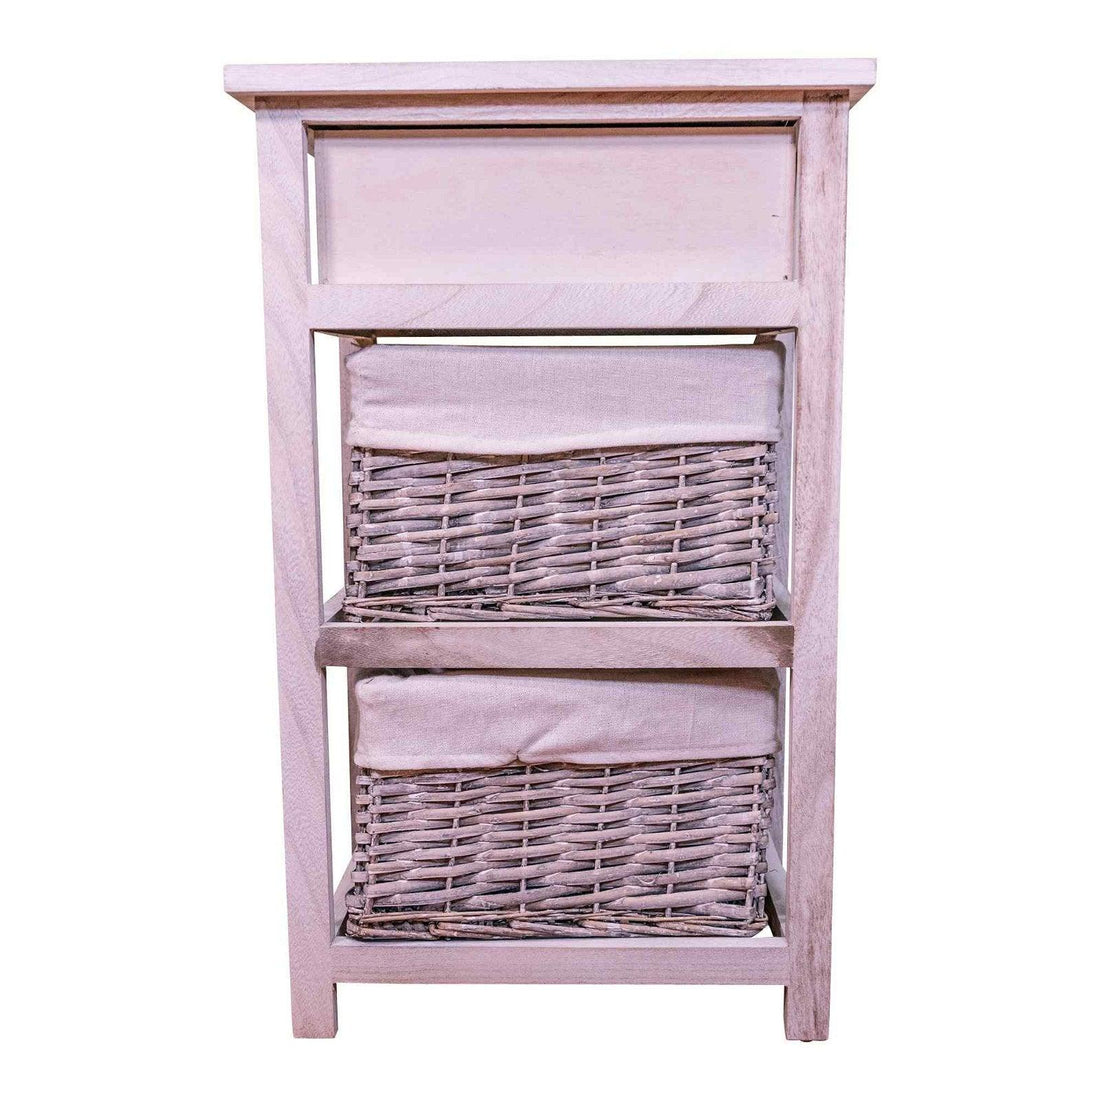 Murray Light Grey Wood Grain Effect Cabinet With Drawers - £59.99 - Storage Units 